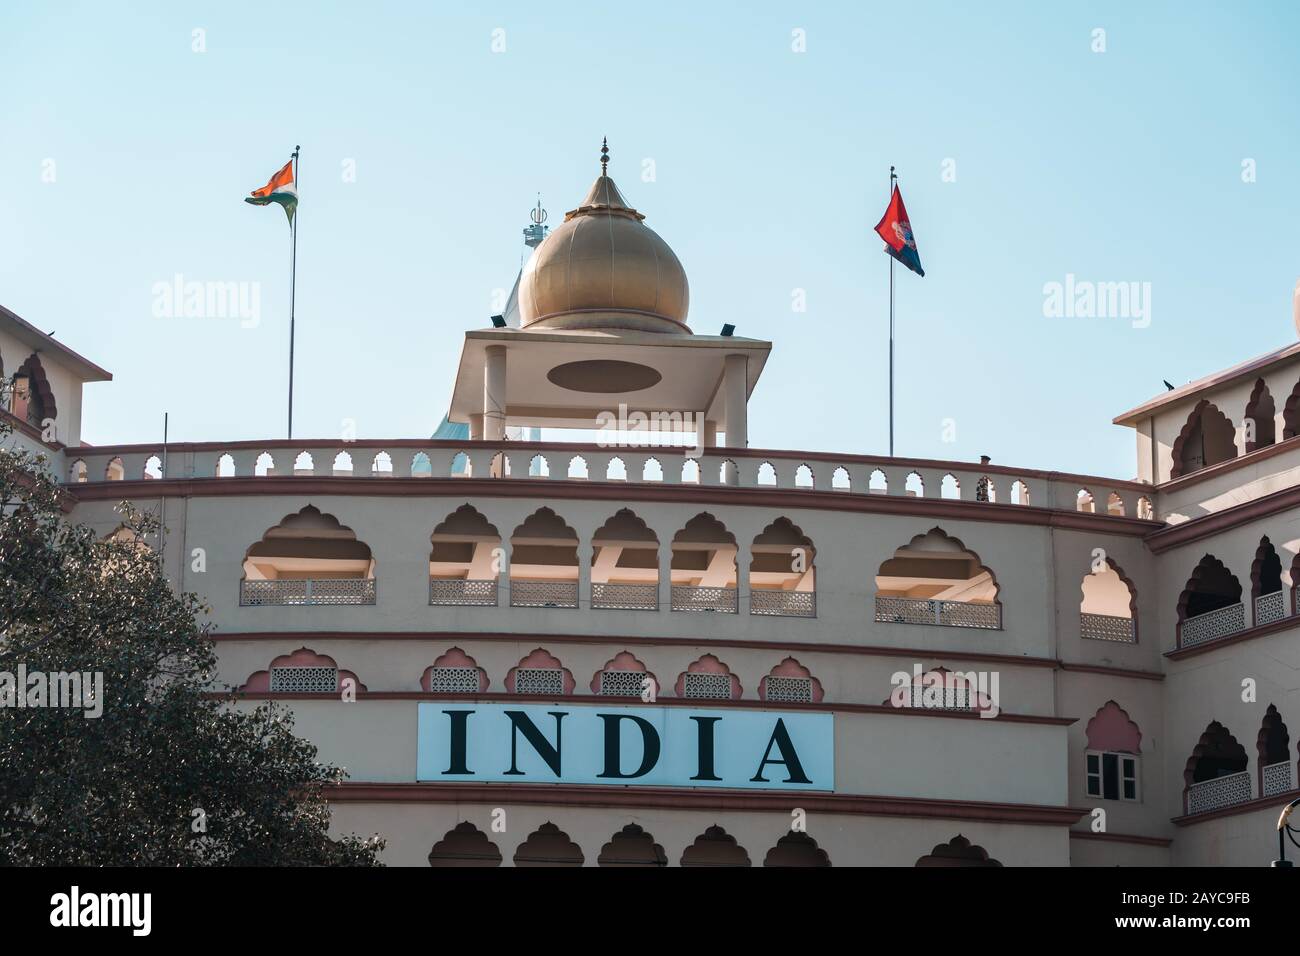 Attari, India - Febuary 8, 2020: Entrance to the stadium from the India sign at the Wagah border closing ceremony with Pakistan in Punjab Stock Photo